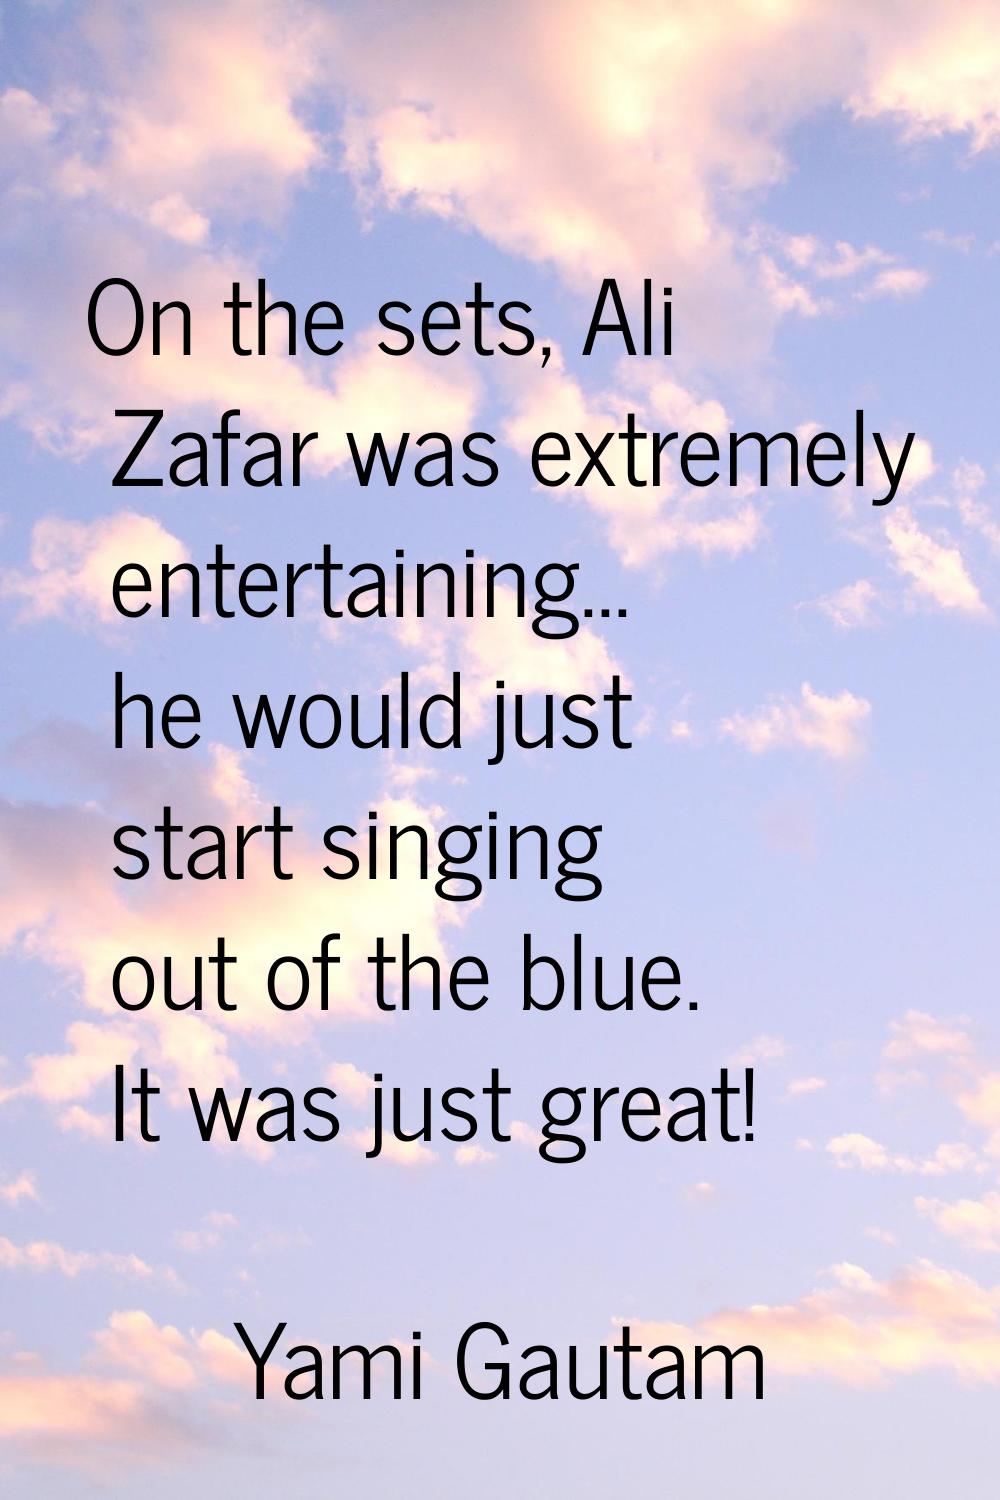 On the sets, Ali Zafar was extremely entertaining... he would just start singing out of the blue. I